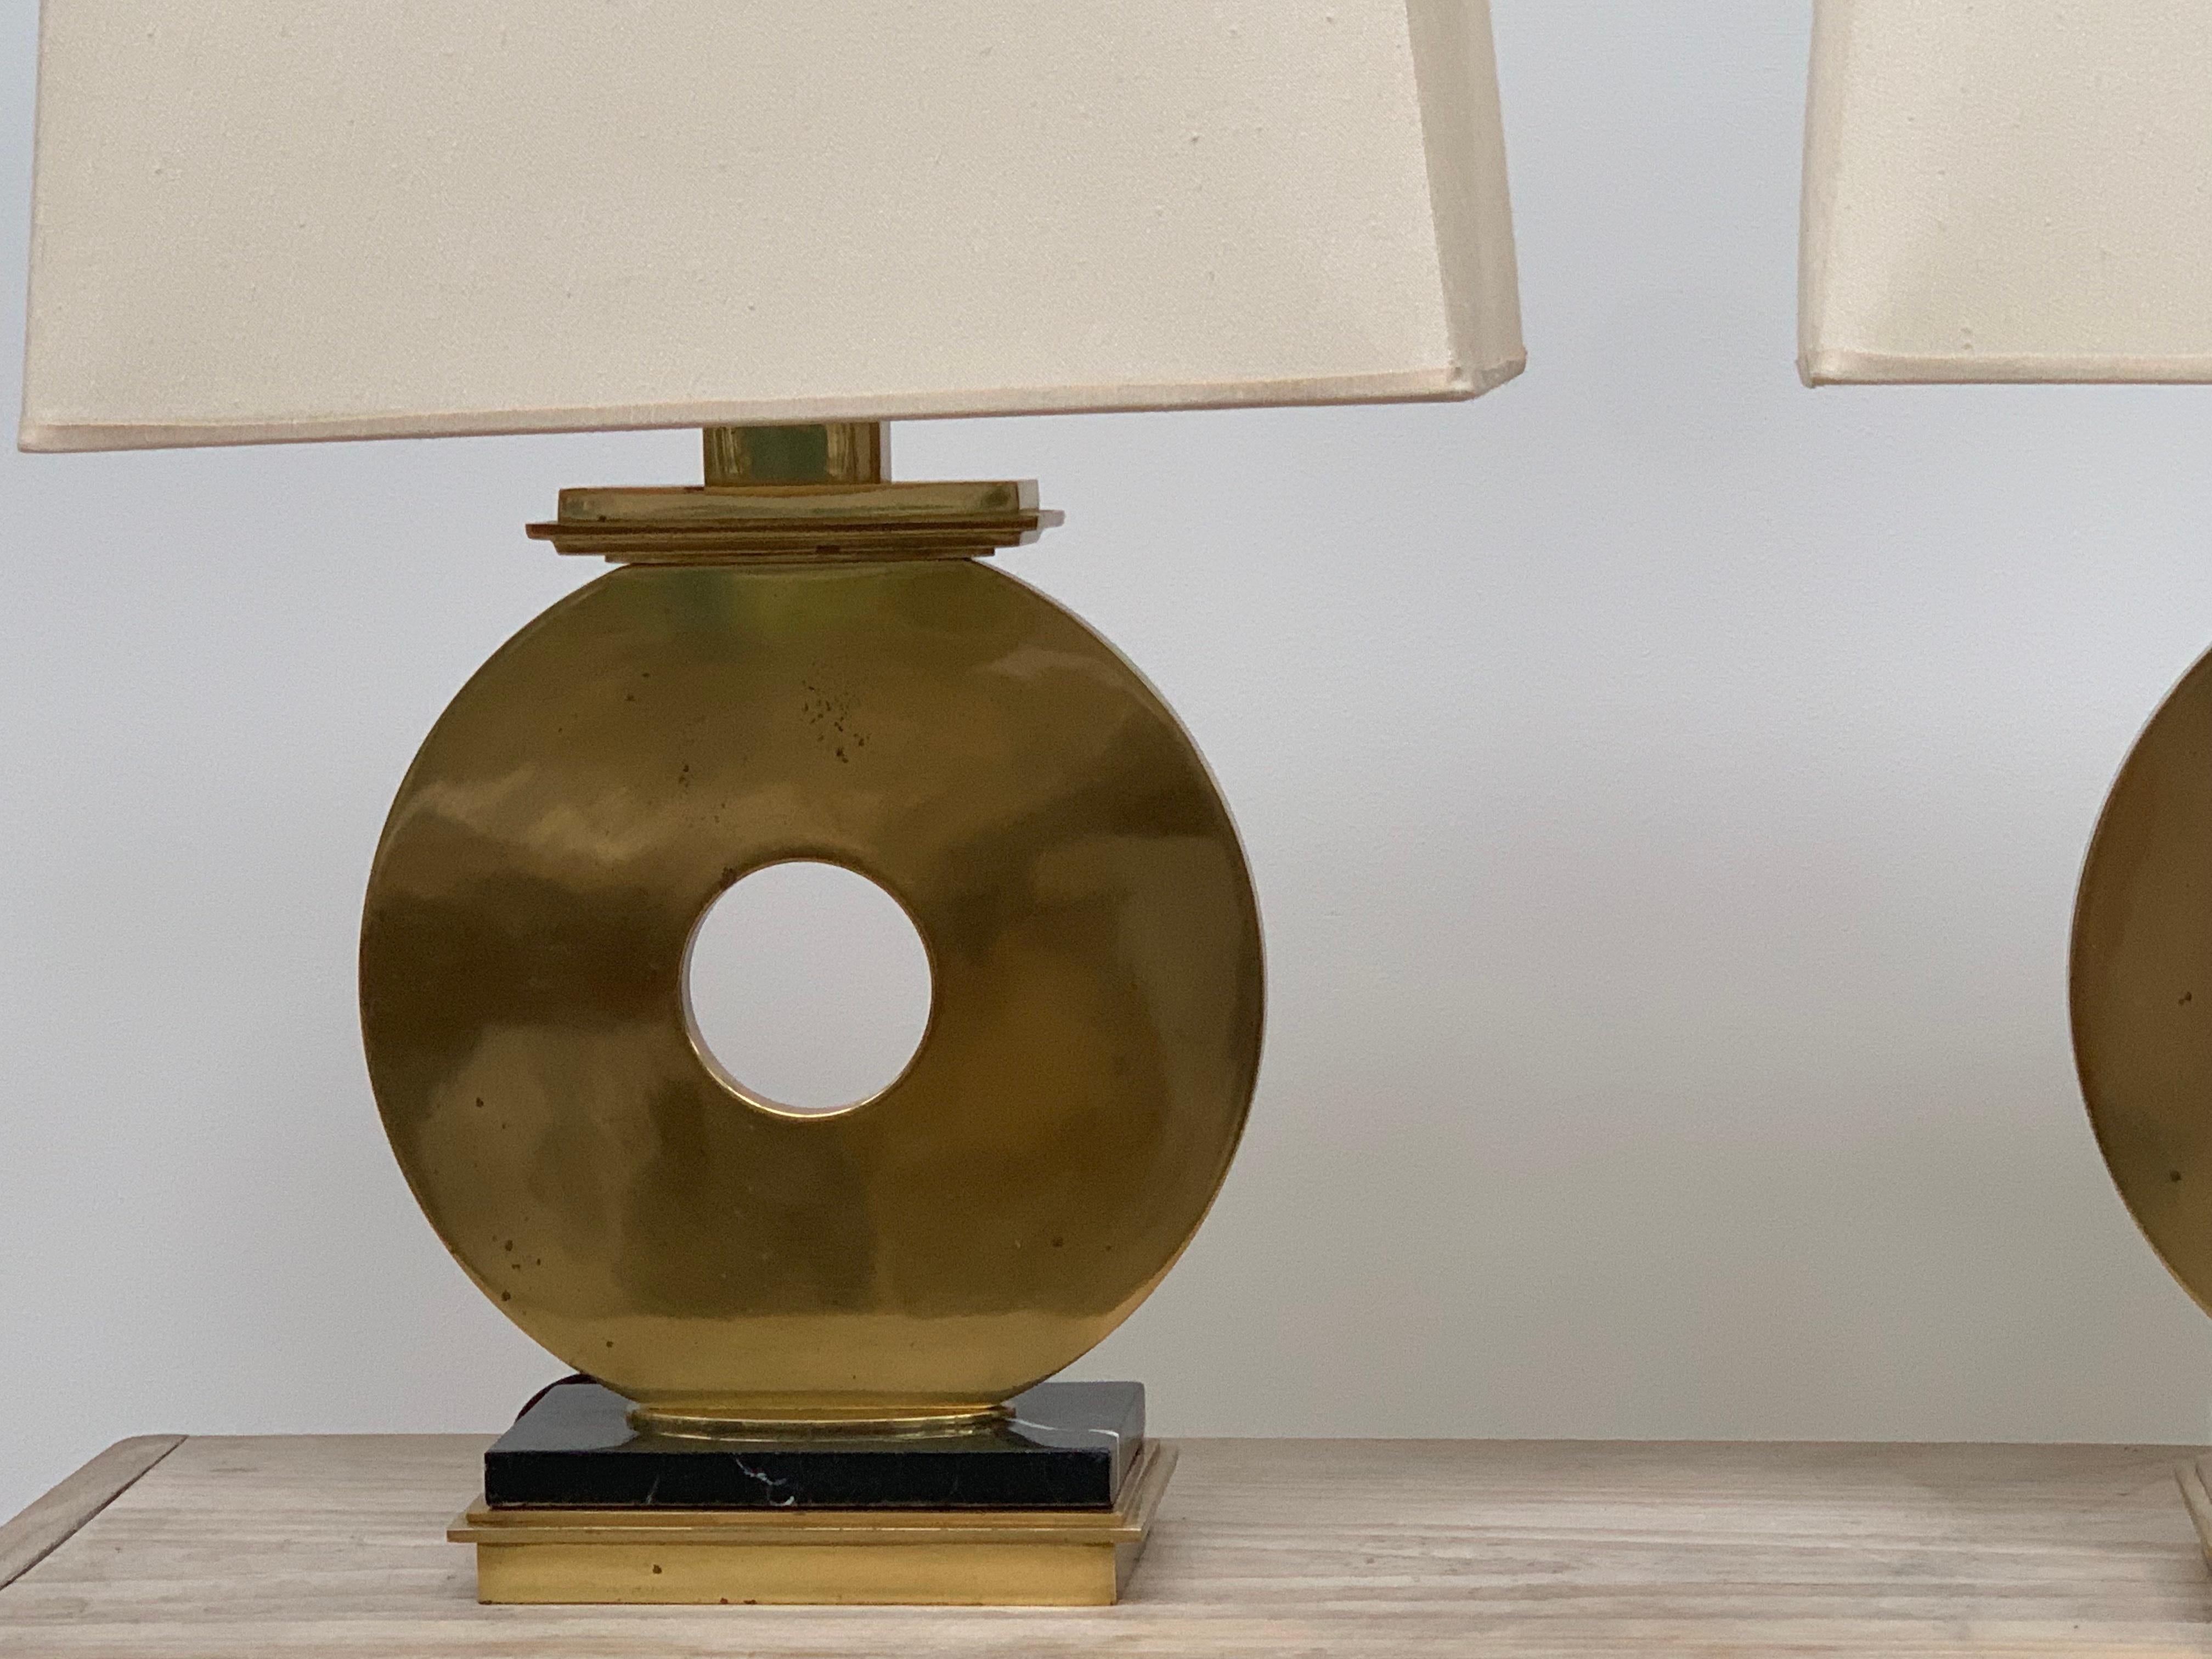 Pair of heavy brass lamps by Robert Abbey. Narrow in profile, round design of an imposing circle of brass on a black marble base. With original shades, signature on harps.